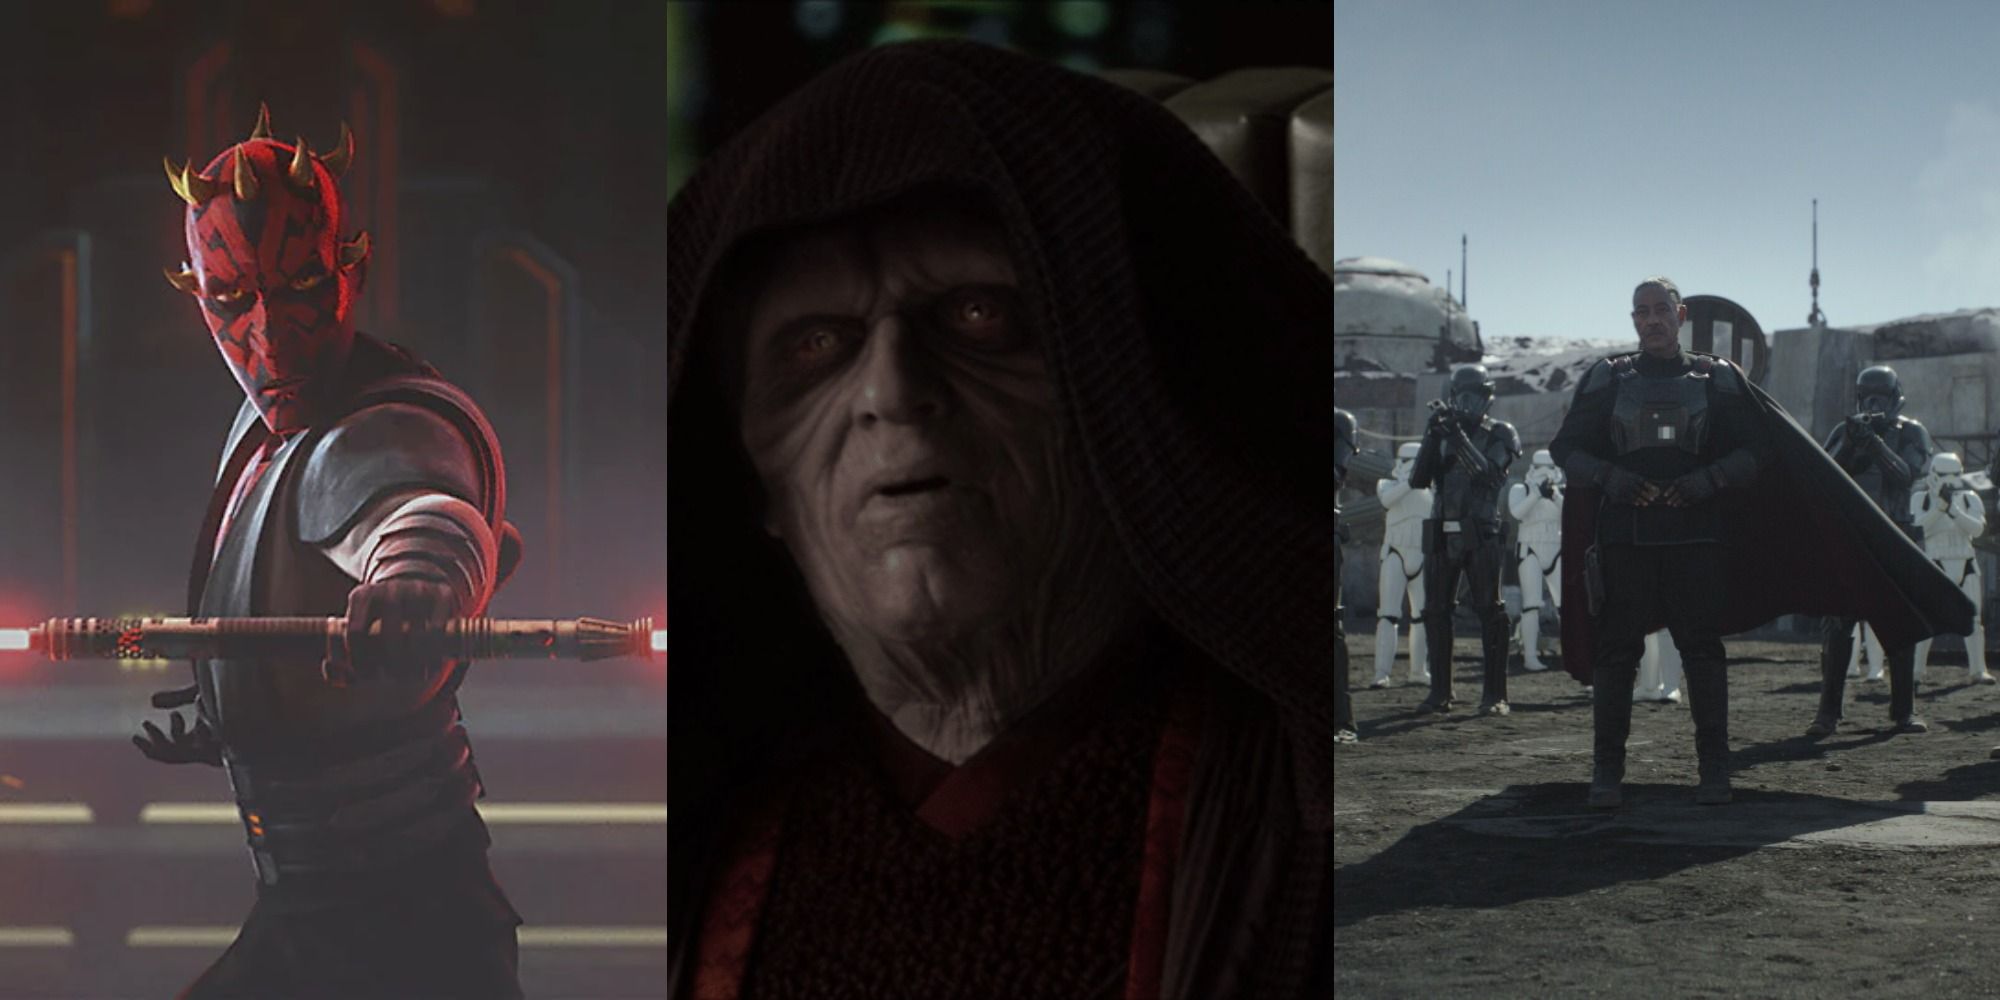 10 FanFavorite Star Wars Villains Ranked From Lamest To Coolest